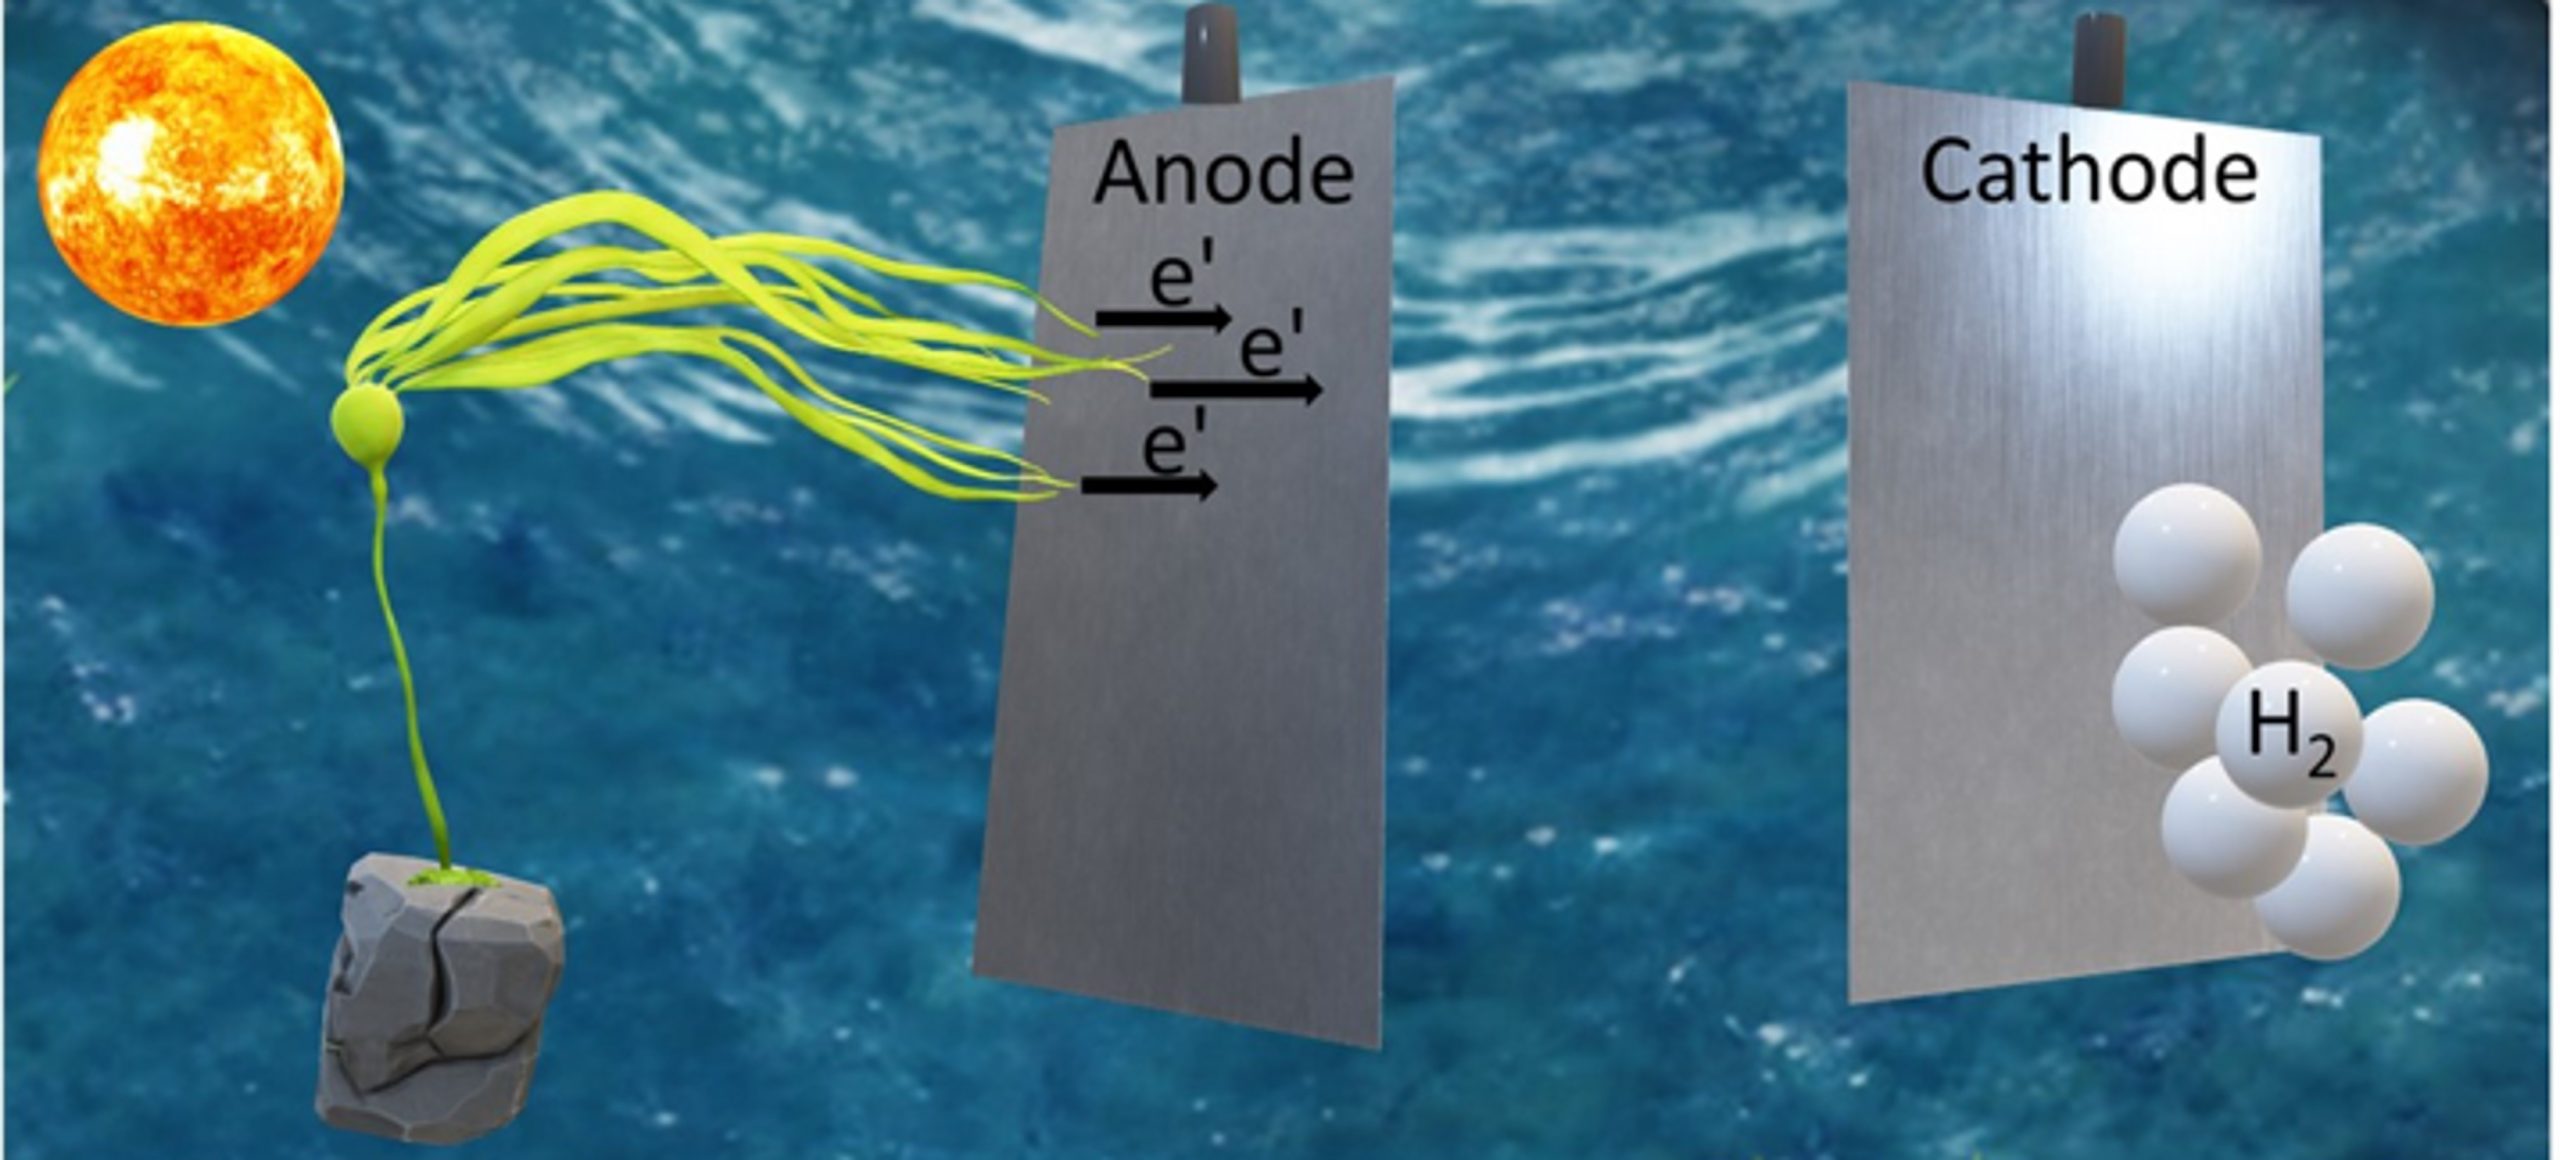 The picture depicts a simulation of the processes harvesting electrical current from seaweed. The seaweed releases known molecules that transport electrons to a stainless-steel electrode (the anode). The electrons transfer to the second electrode (a platinum cathode) which can reduce protons found in the seawater electrolyte solution to hydrogen gas. The current can either be used directly, or if hydrogen is produced, the gas can be used as a future clean fuel. In the dark, the seaweed produces about 50% of the current obtained in light, as less electrons are produced in the absence of the photosynthetic process